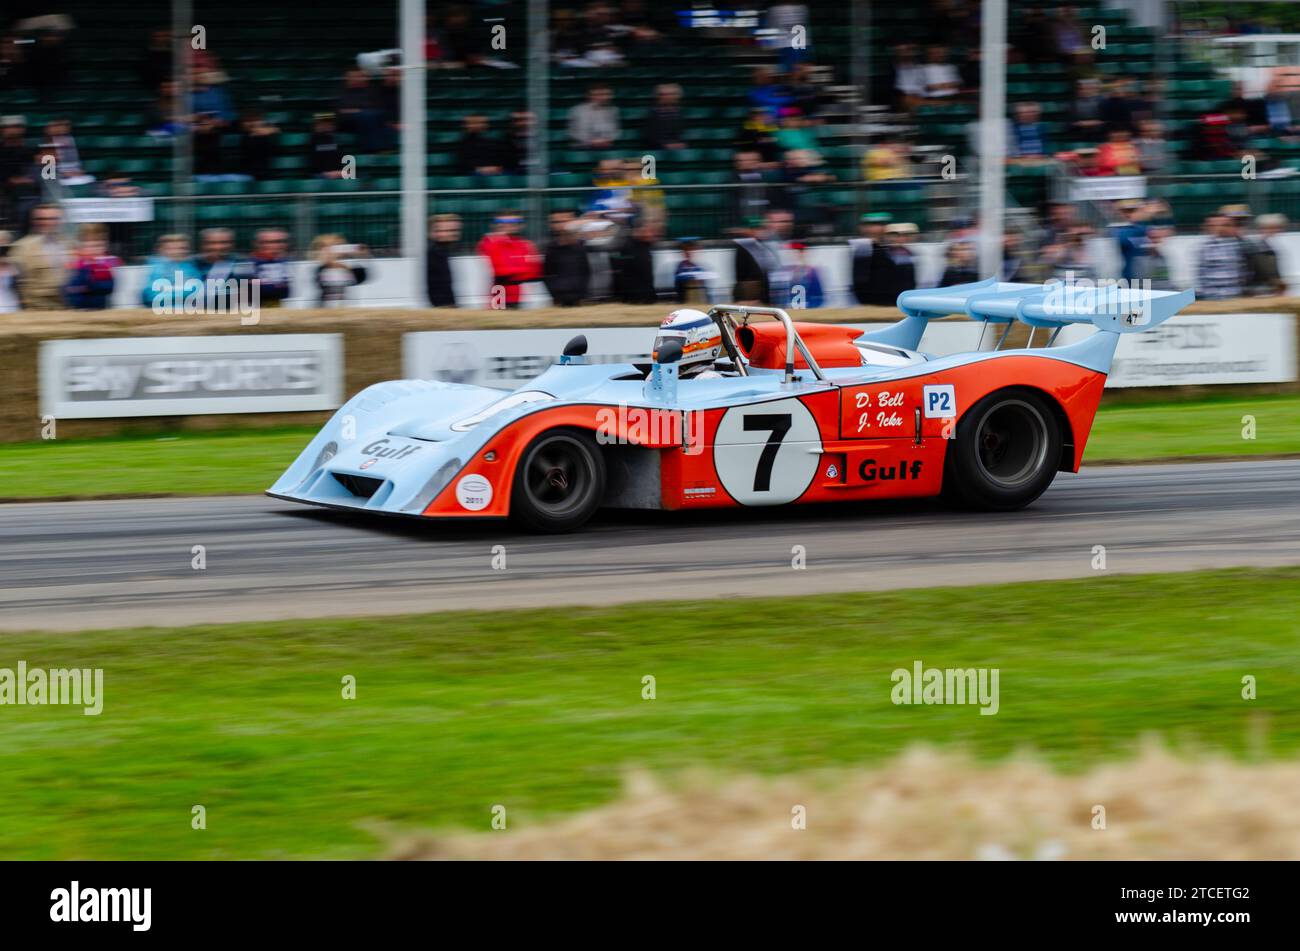 1973 Gulf Mirage-Cosworth GR7 driven by Derek Bell at Goodwood Festival of Speed 2016. Gulf Mirage GR7 Ford Cosworth powered endurance race car Stock Photo